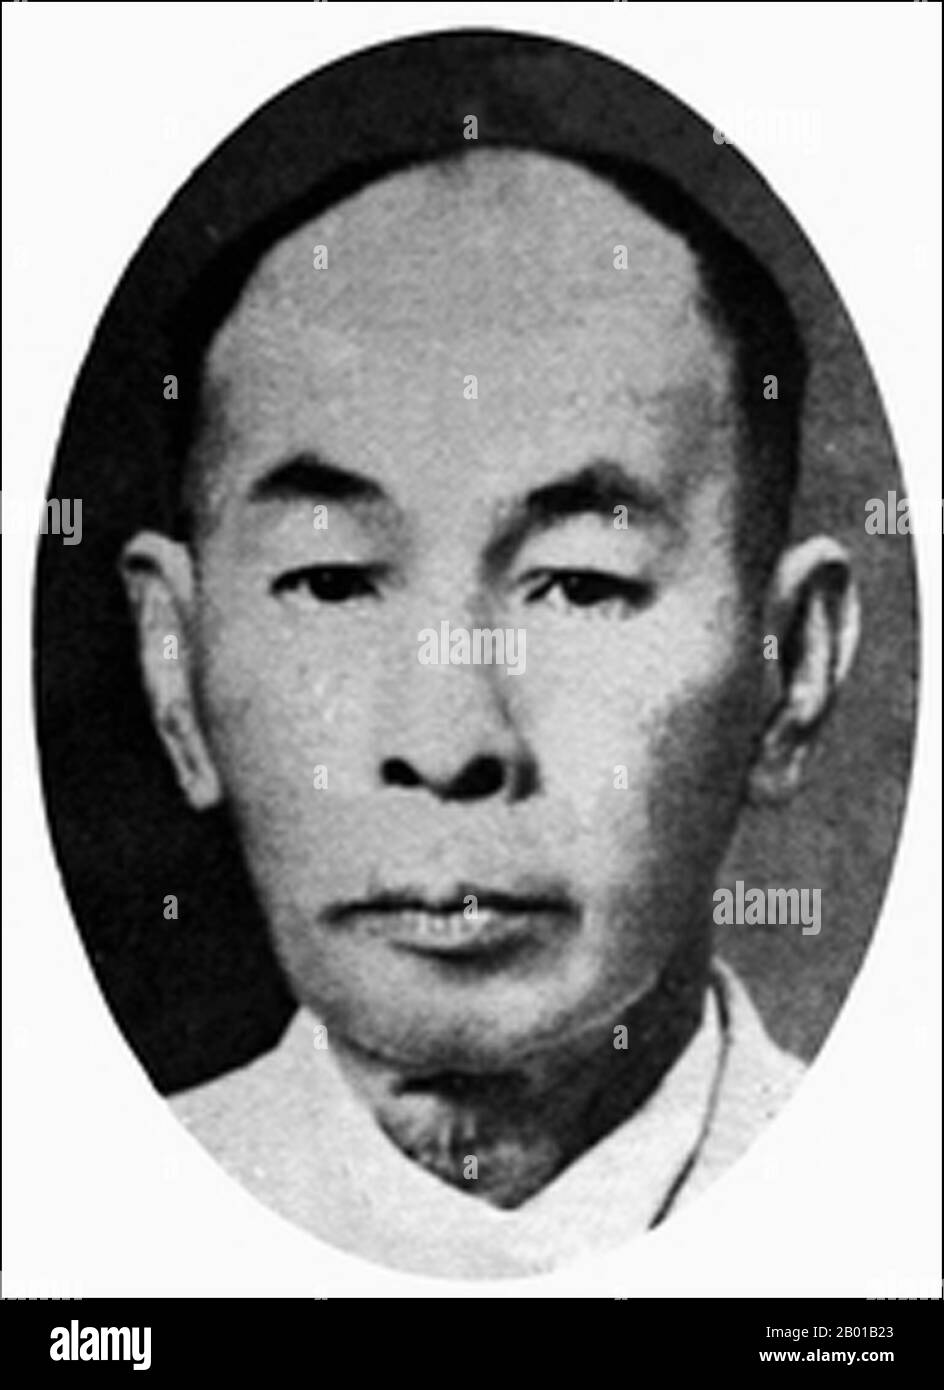 Thailand: Phraya Manopakorn Nititada (15 July 1884 - 1 October 1948), Prime Minister of Thailand (r. 1932-1933), c. 1930s.  Phraya Manopakorn Nitithada, born Kon Hutasingha, was the first Prime Minister of Siam after the Siamese Revolution of 1932. He was selected by the leader of the People's Party - the party that instigated the revolution. However, in the following year, 1933,  Manopakorn was ousted by a coup due to conflicts between members of the People's Party. Manopakorn was then exiled to Penang, British Malaya, by train and spent the rest of his life there until his death in 1948,. Stock Photo